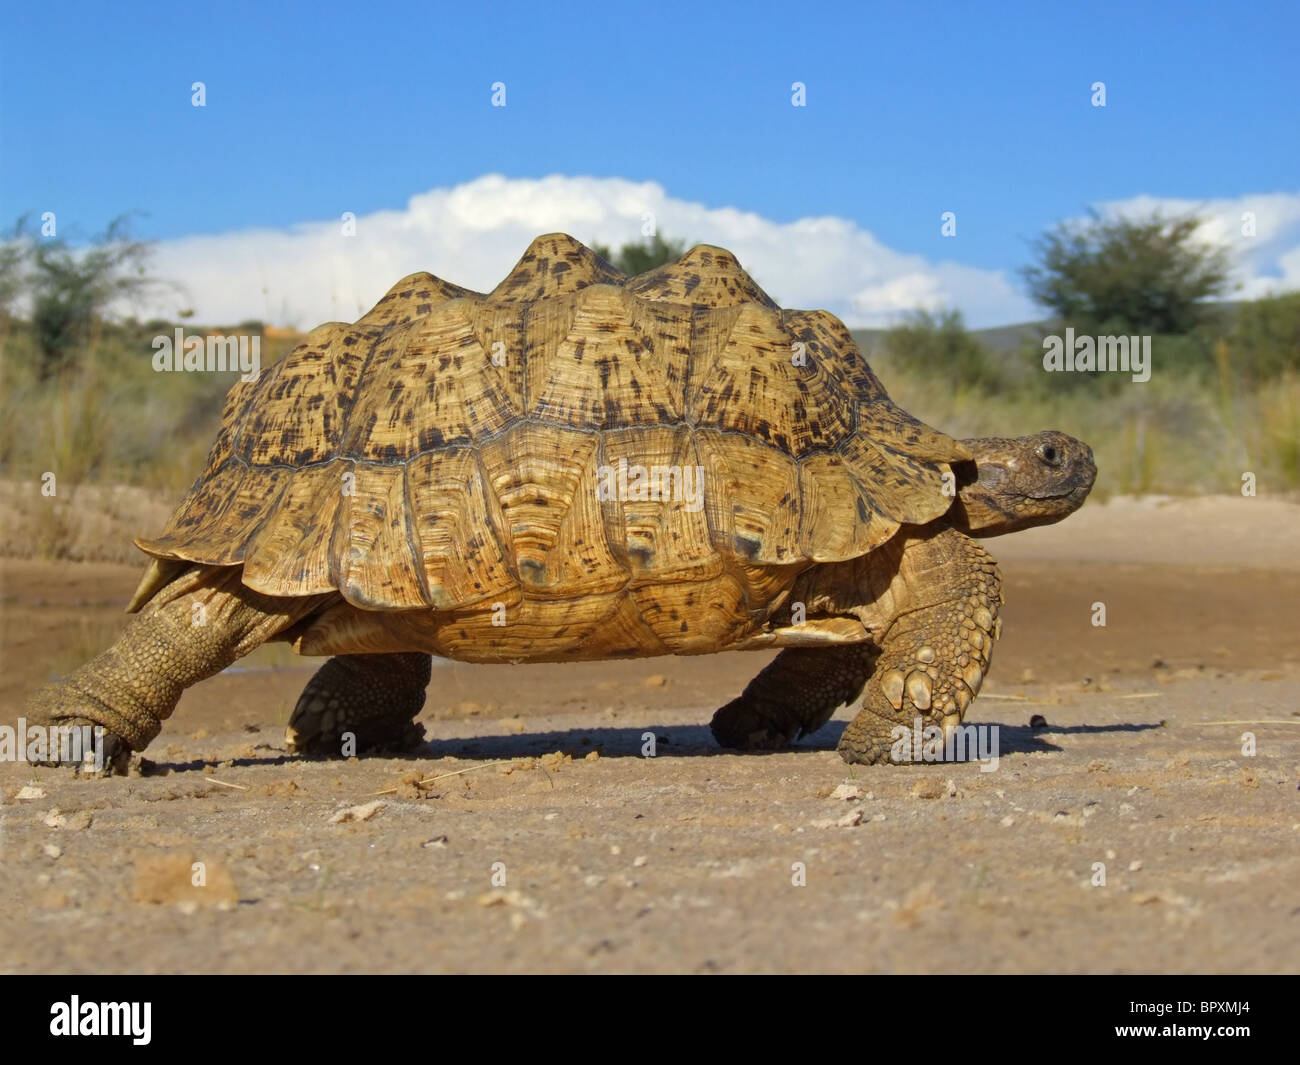 Mountain tortoise (Geochelone pardalis) in natural environment, South Africa Stock Photo